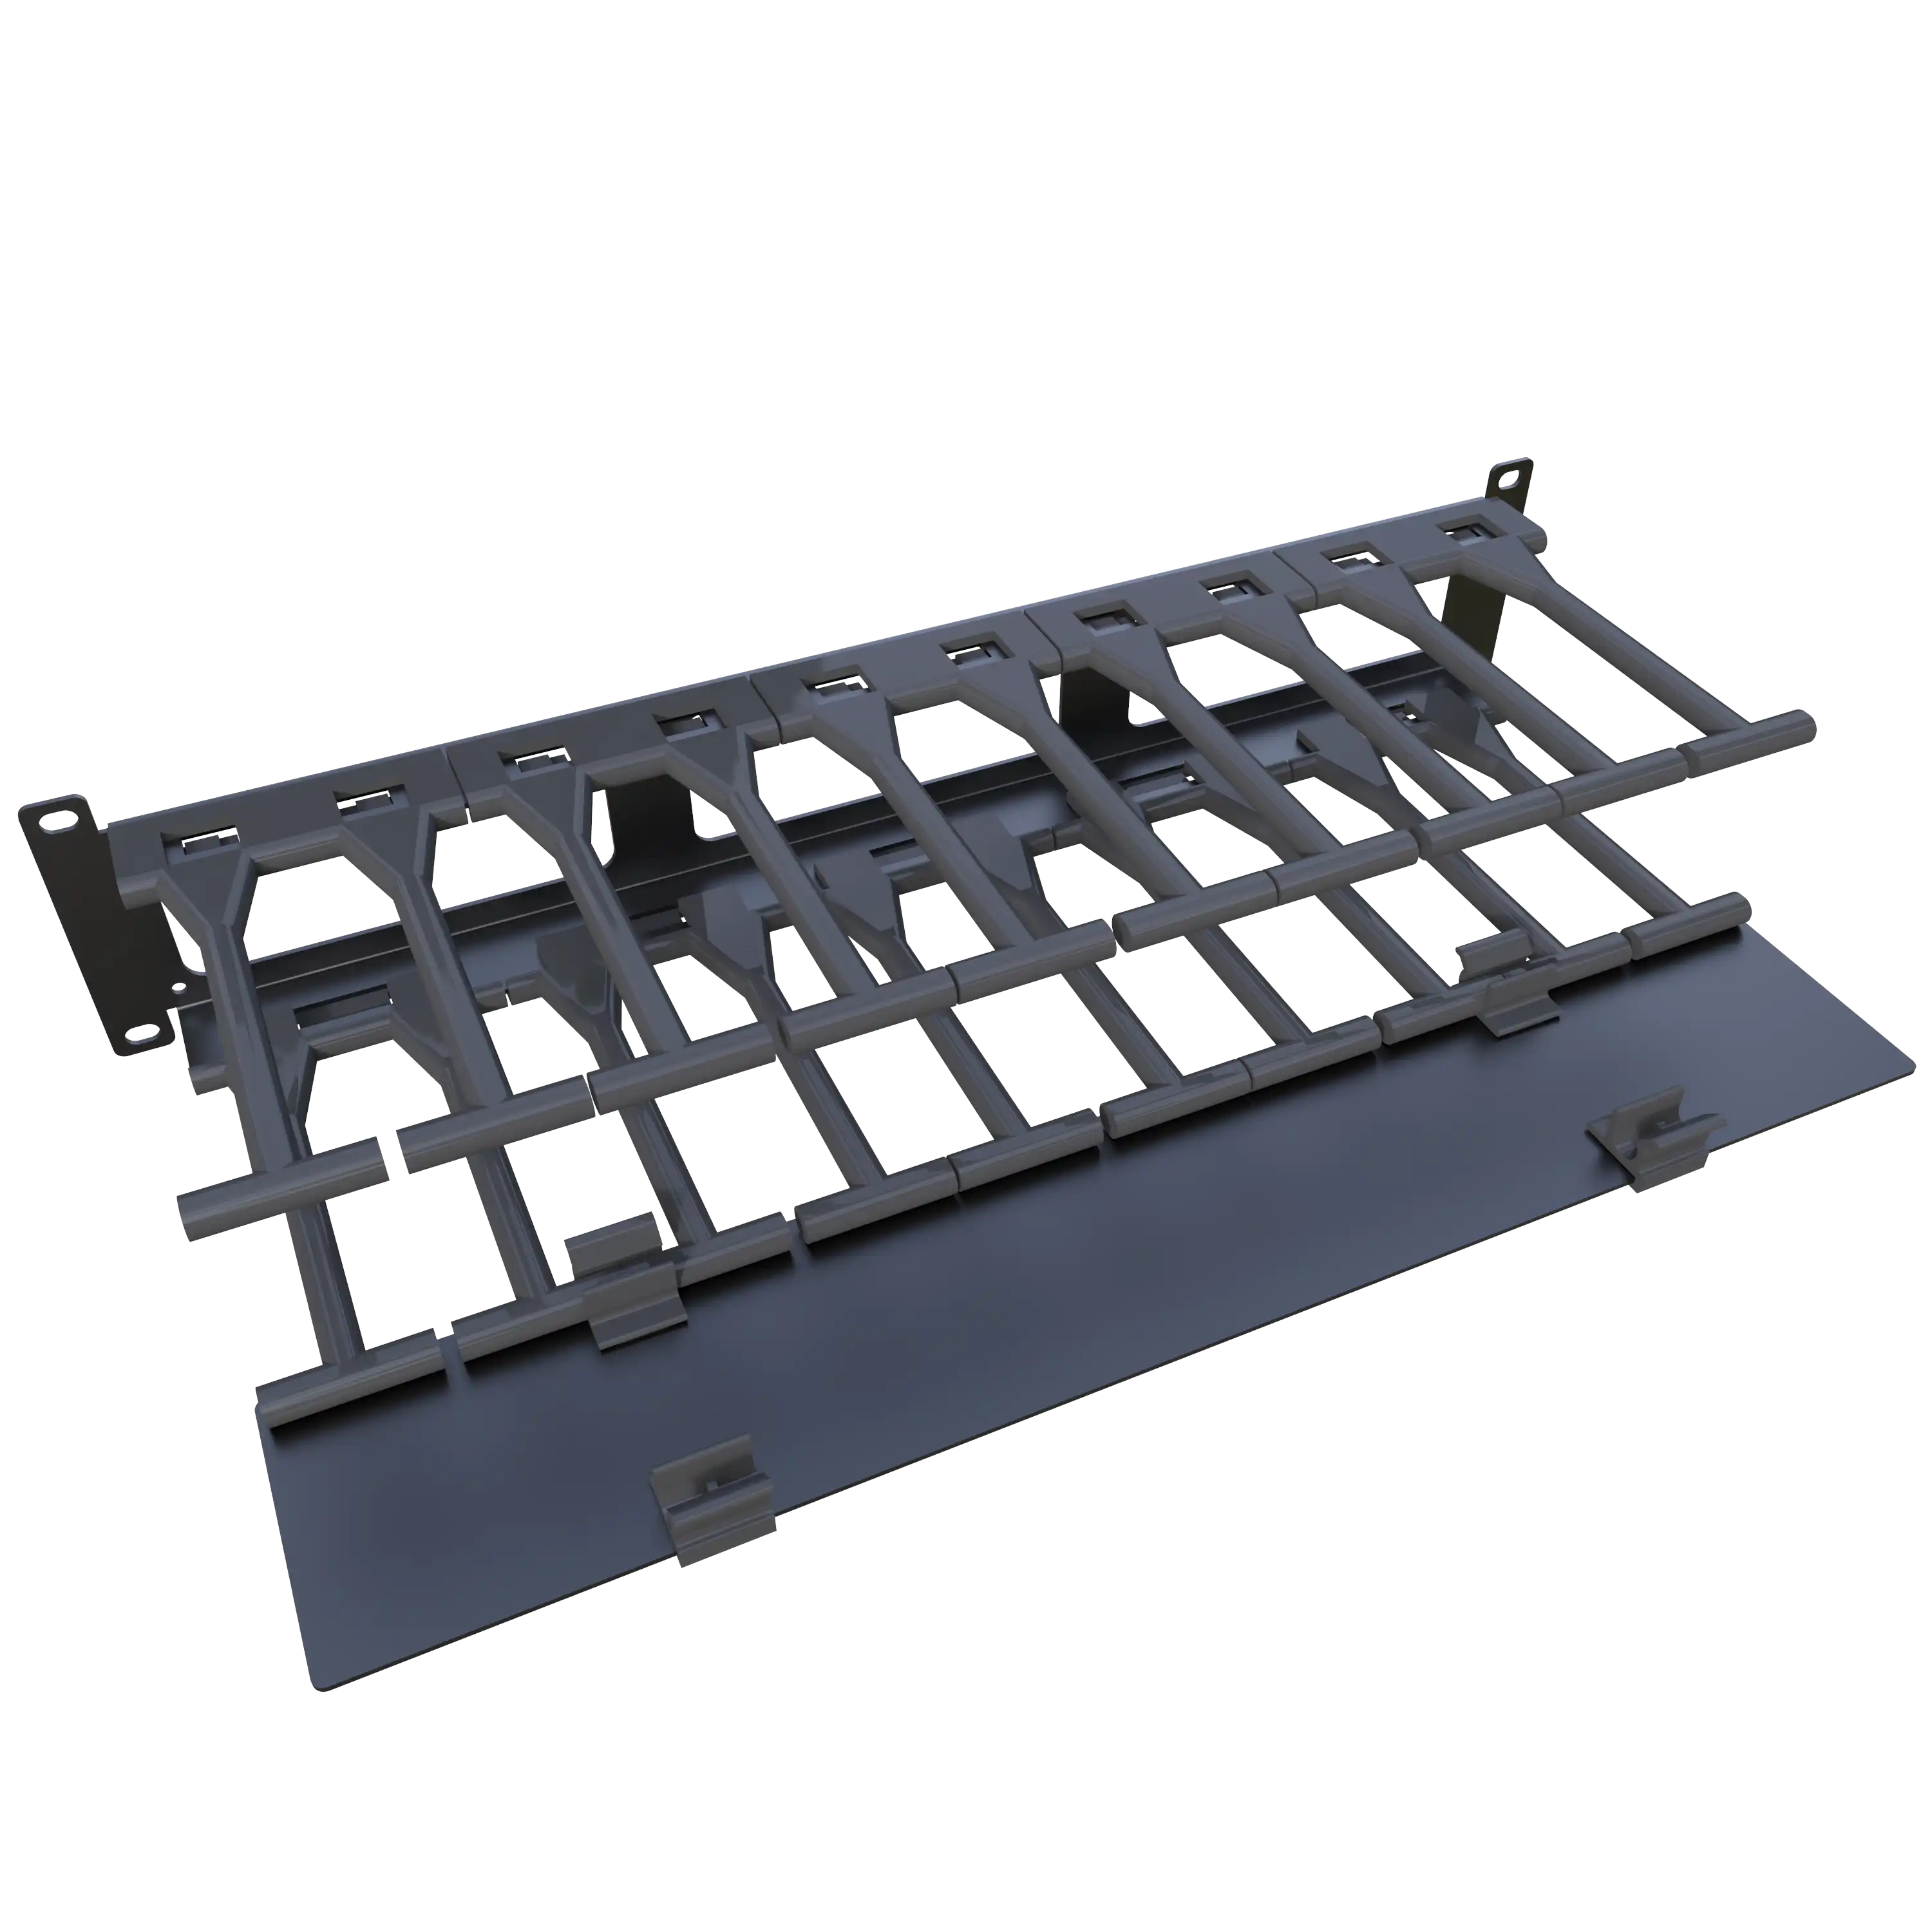 RB-HFMD Series - Hammond Manufacturing Rack Systems - KGA Enclosures Ltd